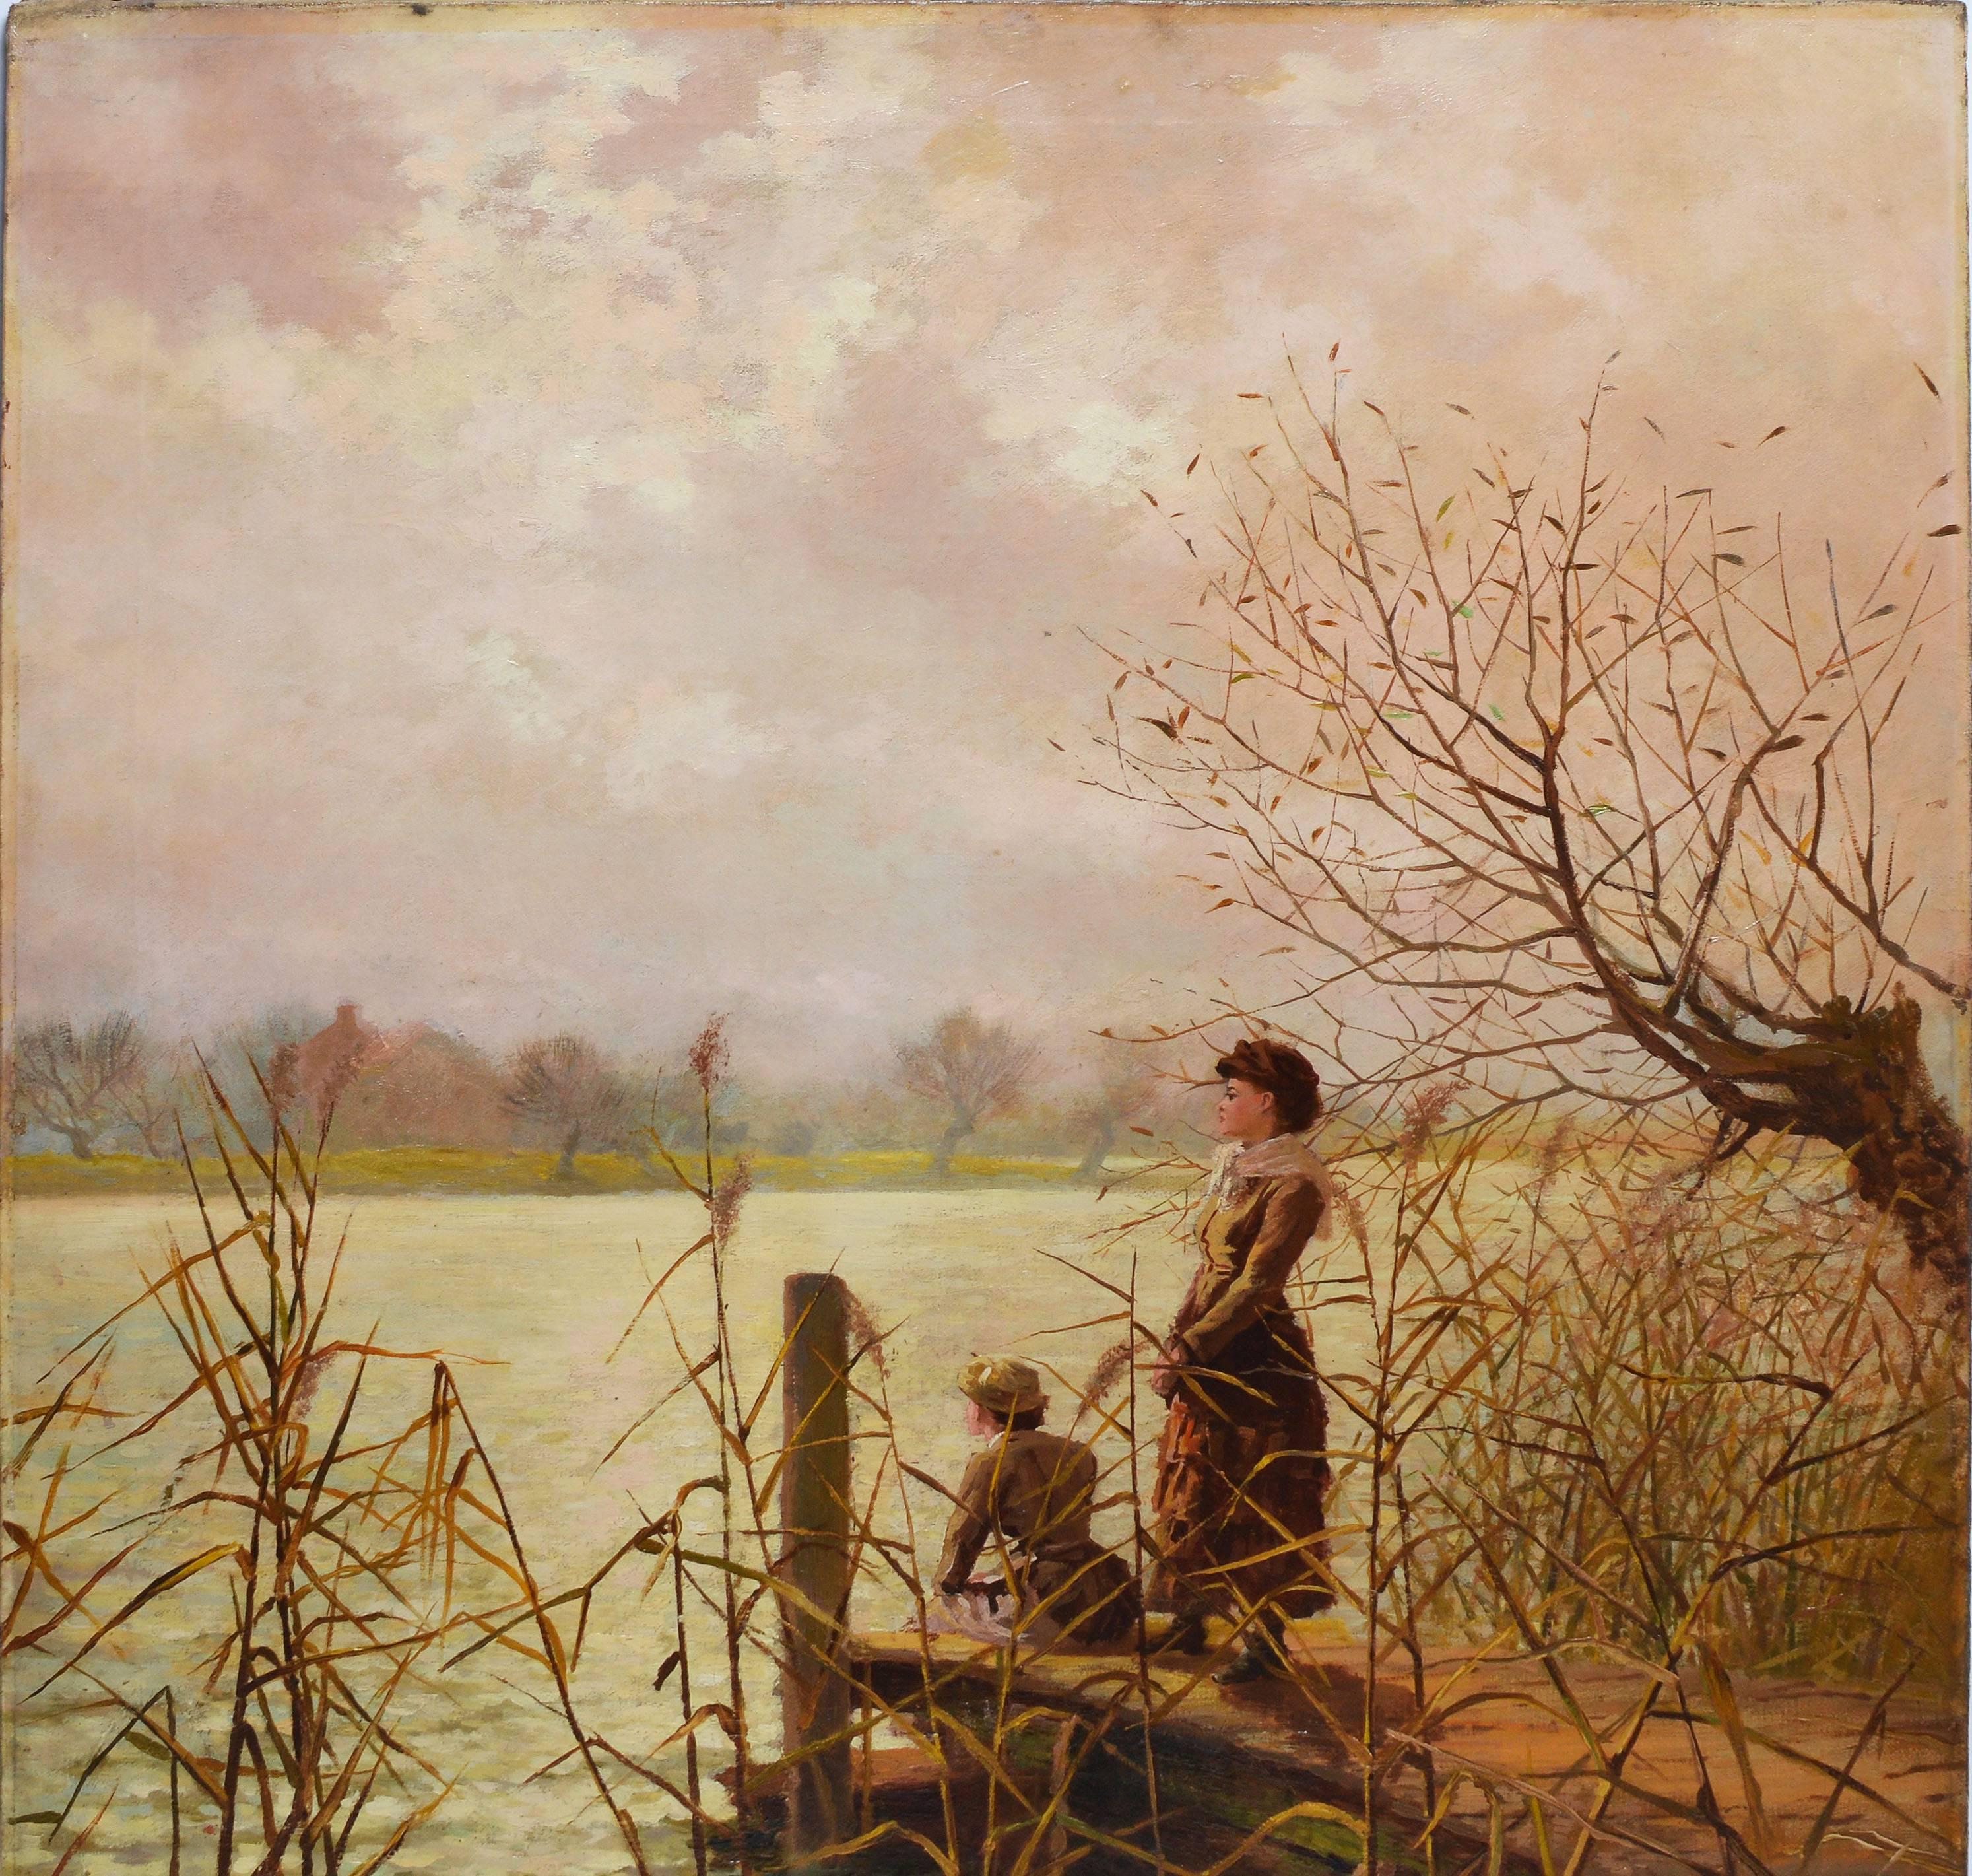 Impressionist fall landscape with figures by a dock.  Oil on canvas, circa 1890.  Signed lower right.  Unframed.  Image size, 28